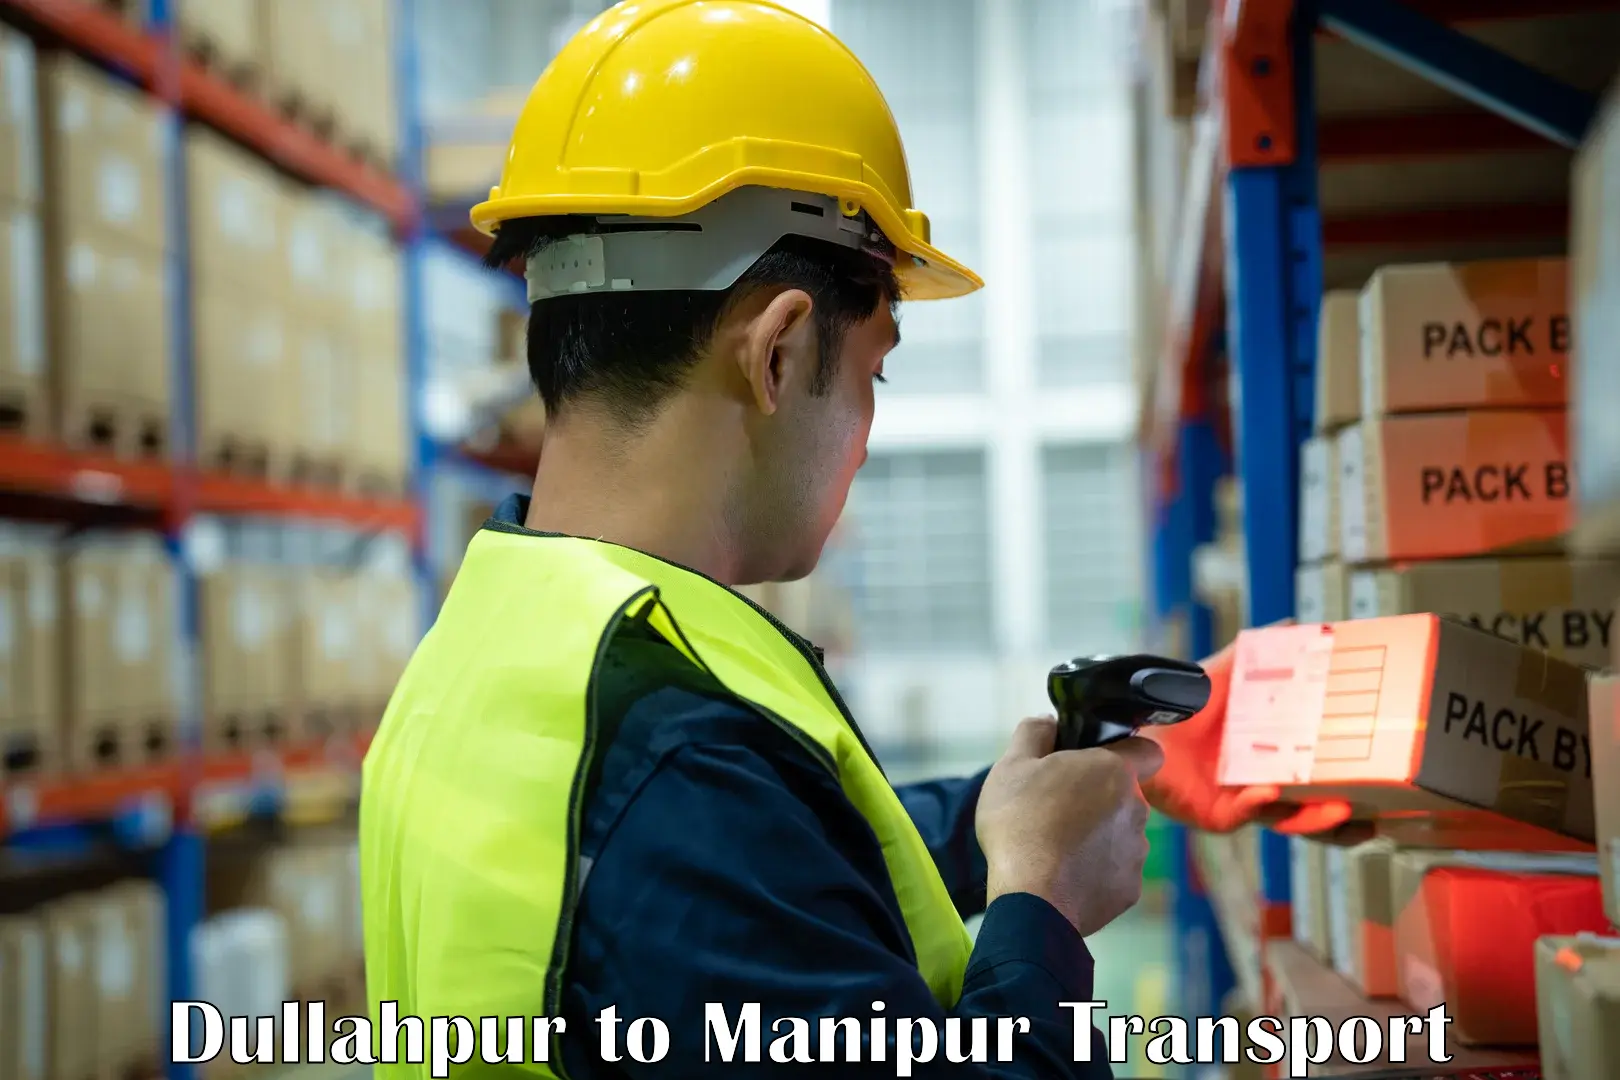 Pick up transport service in Dullahpur to Manipur